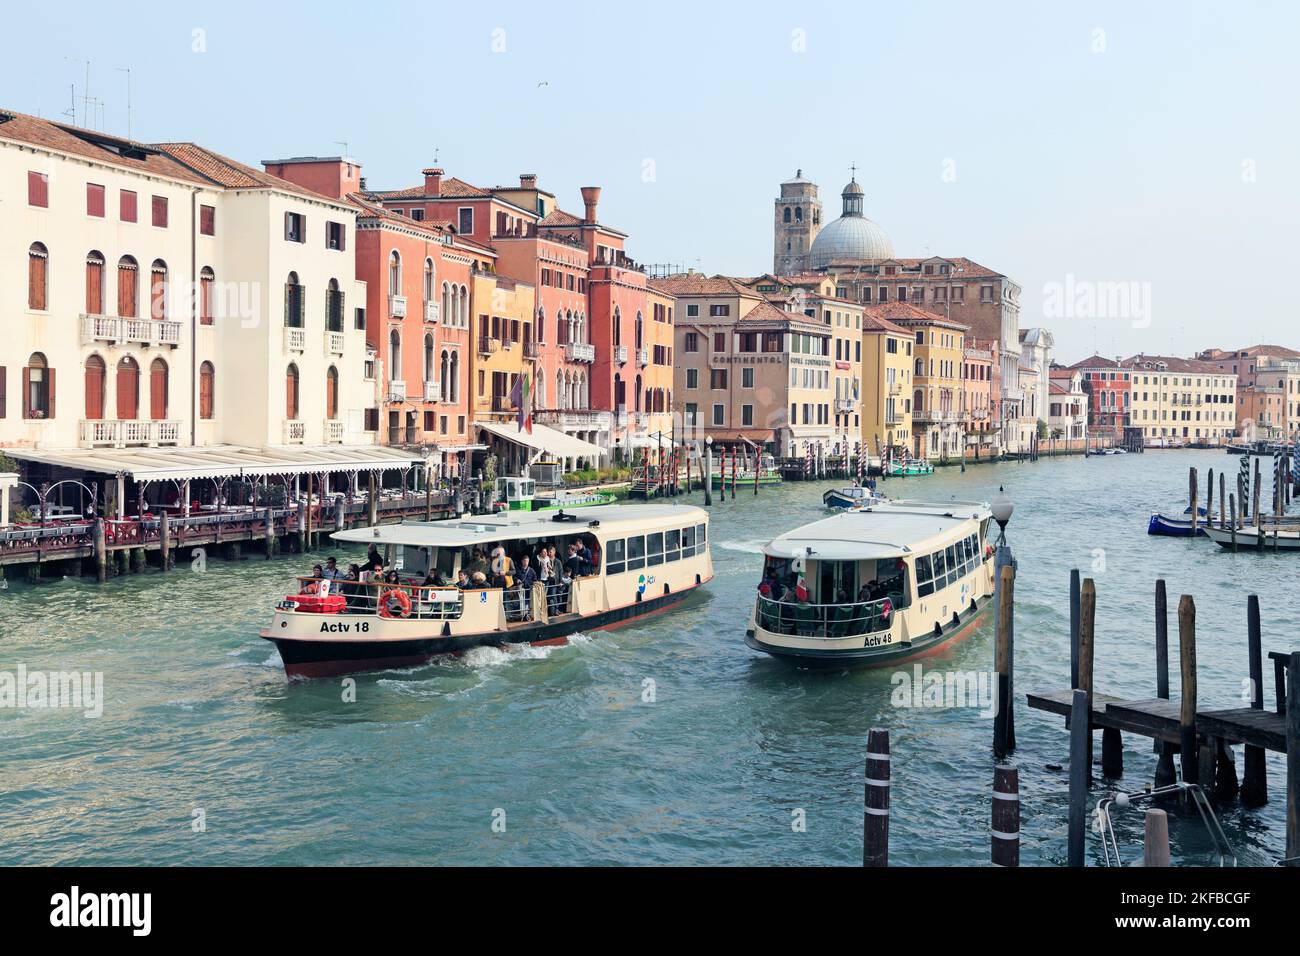 Venice, Italy. Ferries on Canale Grande, Grand canal, transporting people. Stock Photo